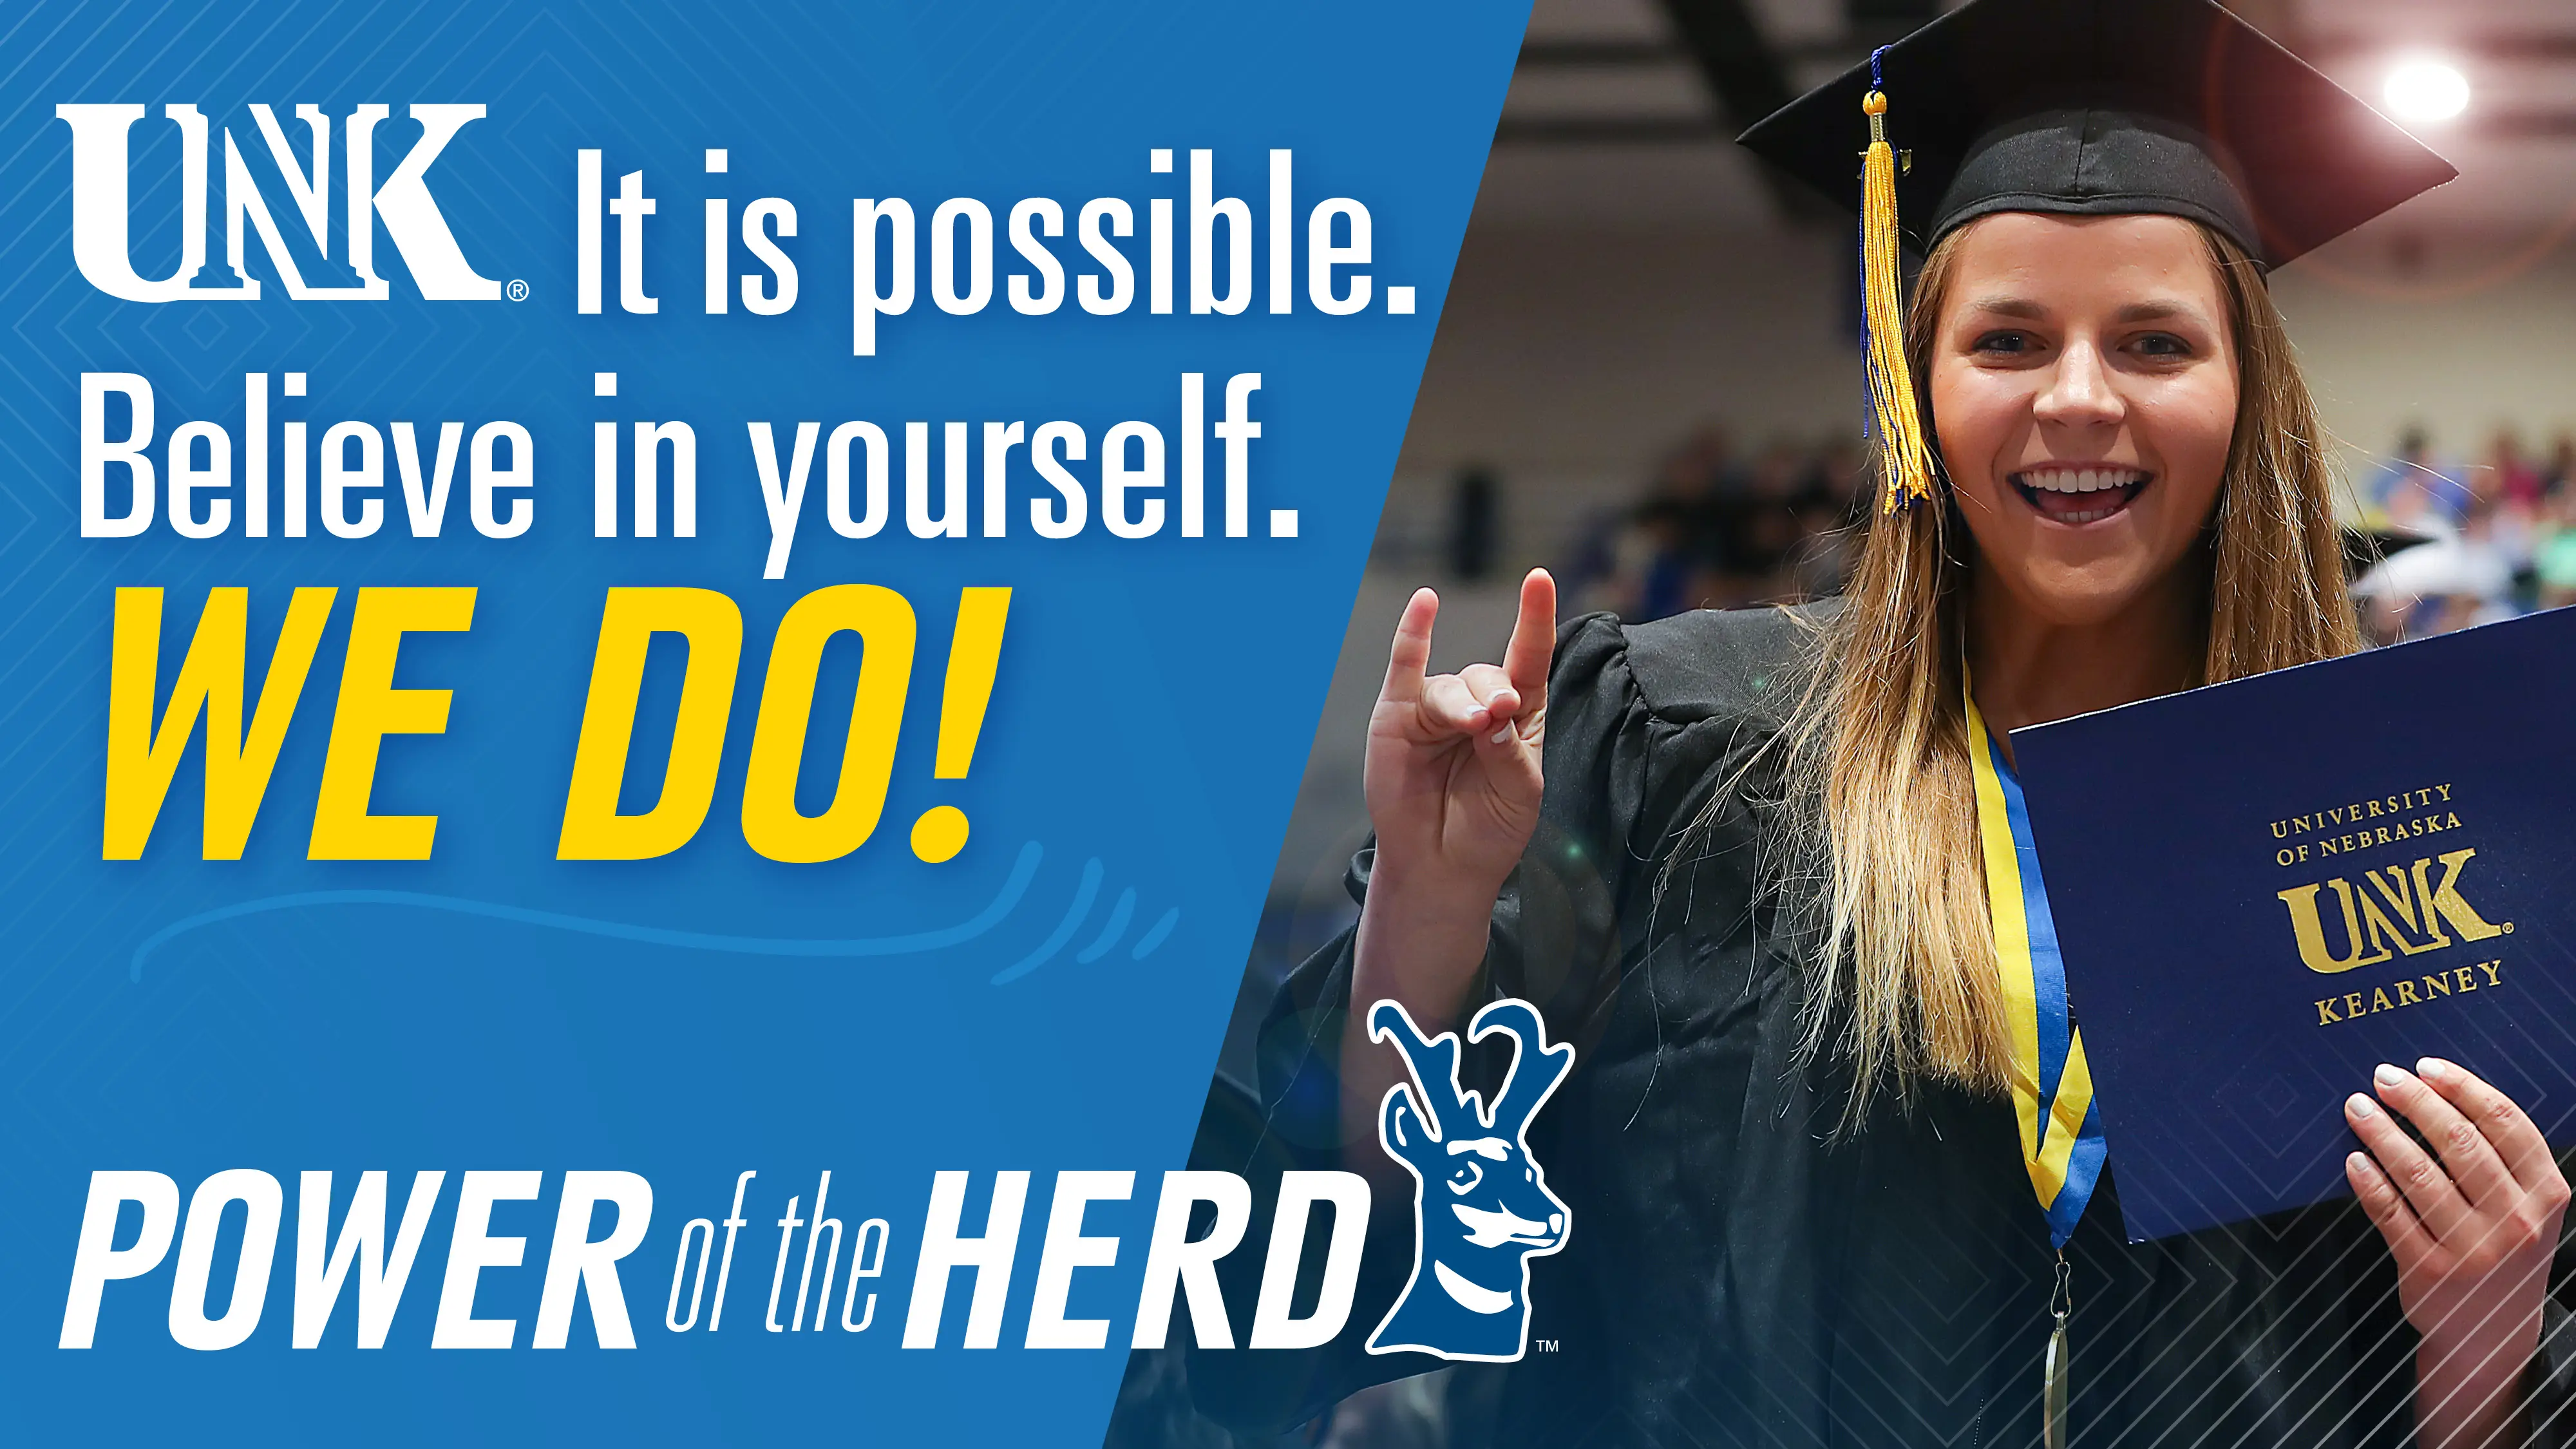 advertisement sample showing a student posing with louie the loper and the words you are strong and capable, go for it! power of the herd